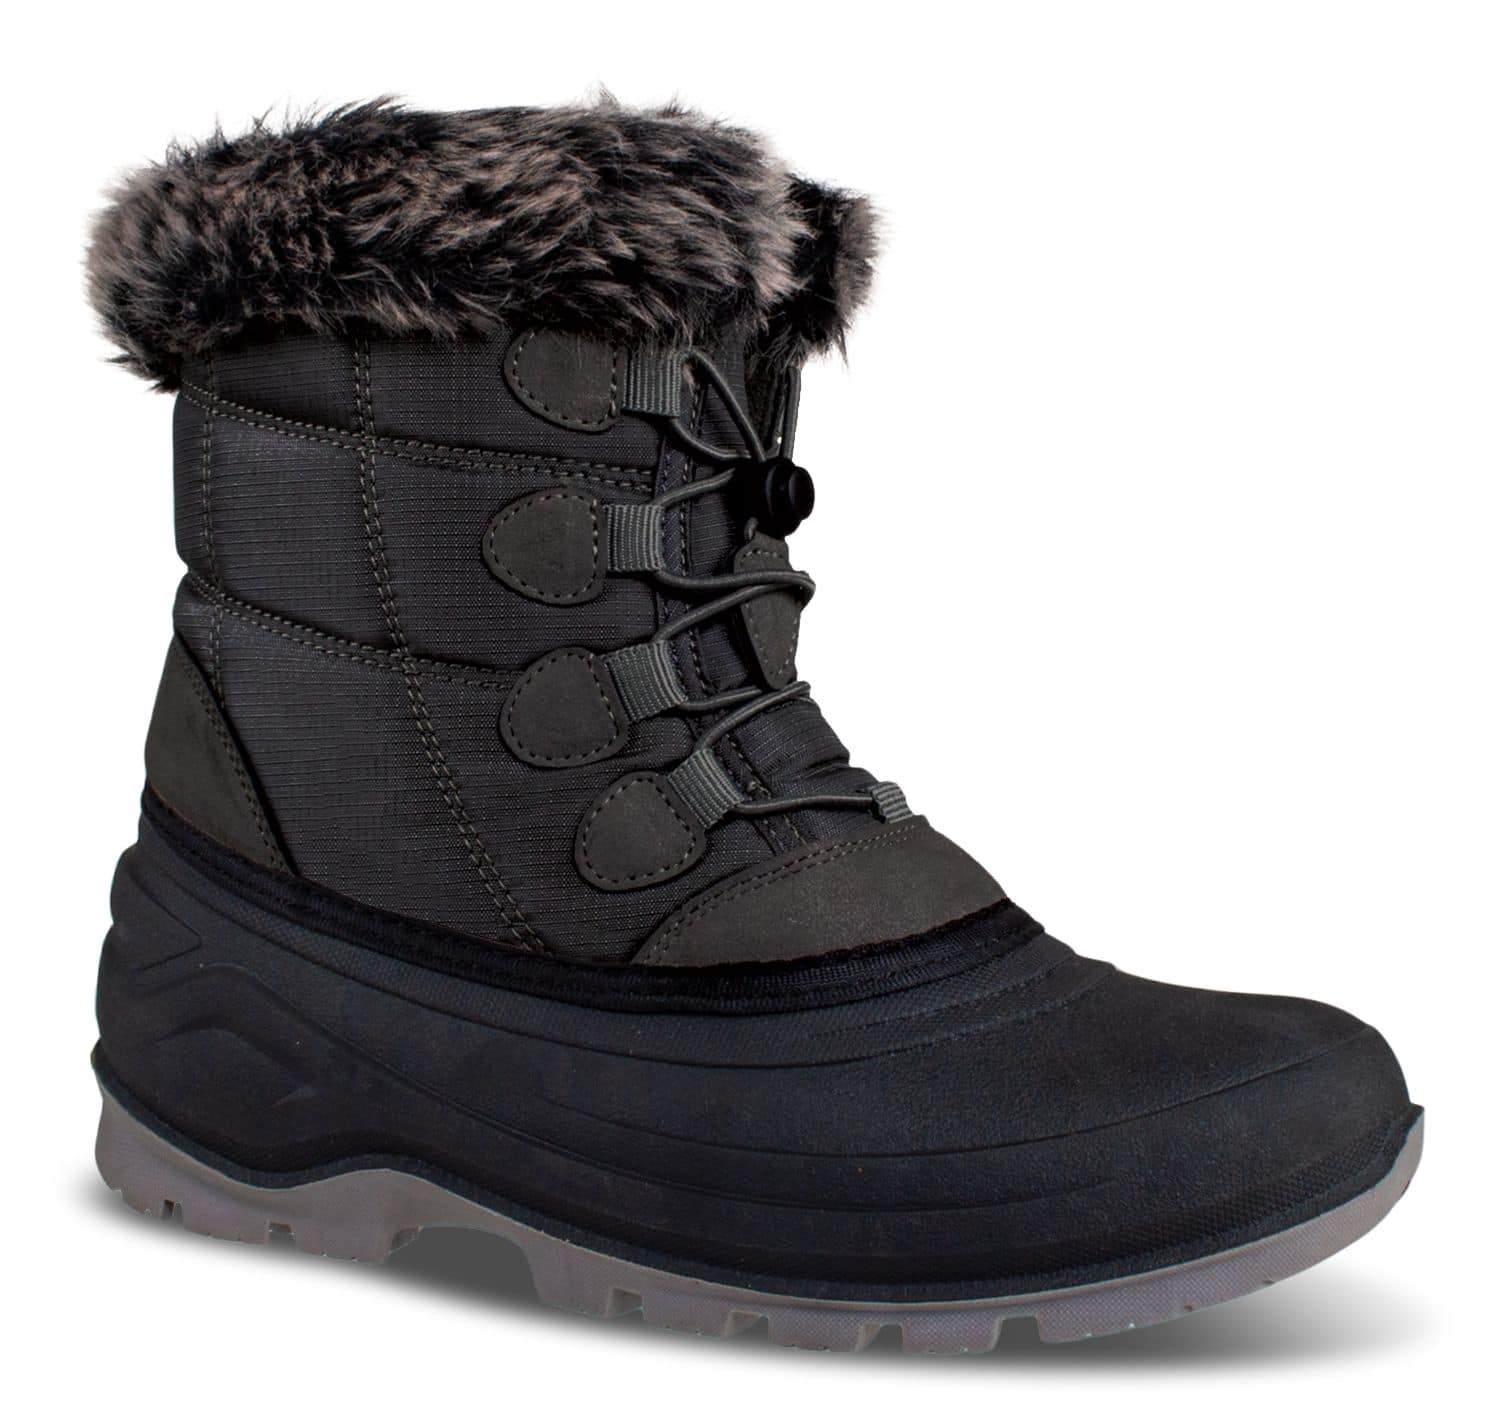 https://media-www.canadiantire.ca/product/playing/footwear-apparel/winter-footwear-apparel/1873851/outbound-faux-fur-insulated-winter-boot-w6-9f0eb8ad-bd08-459c-a00c-534a7b91f24f-jpgrendition.jpg